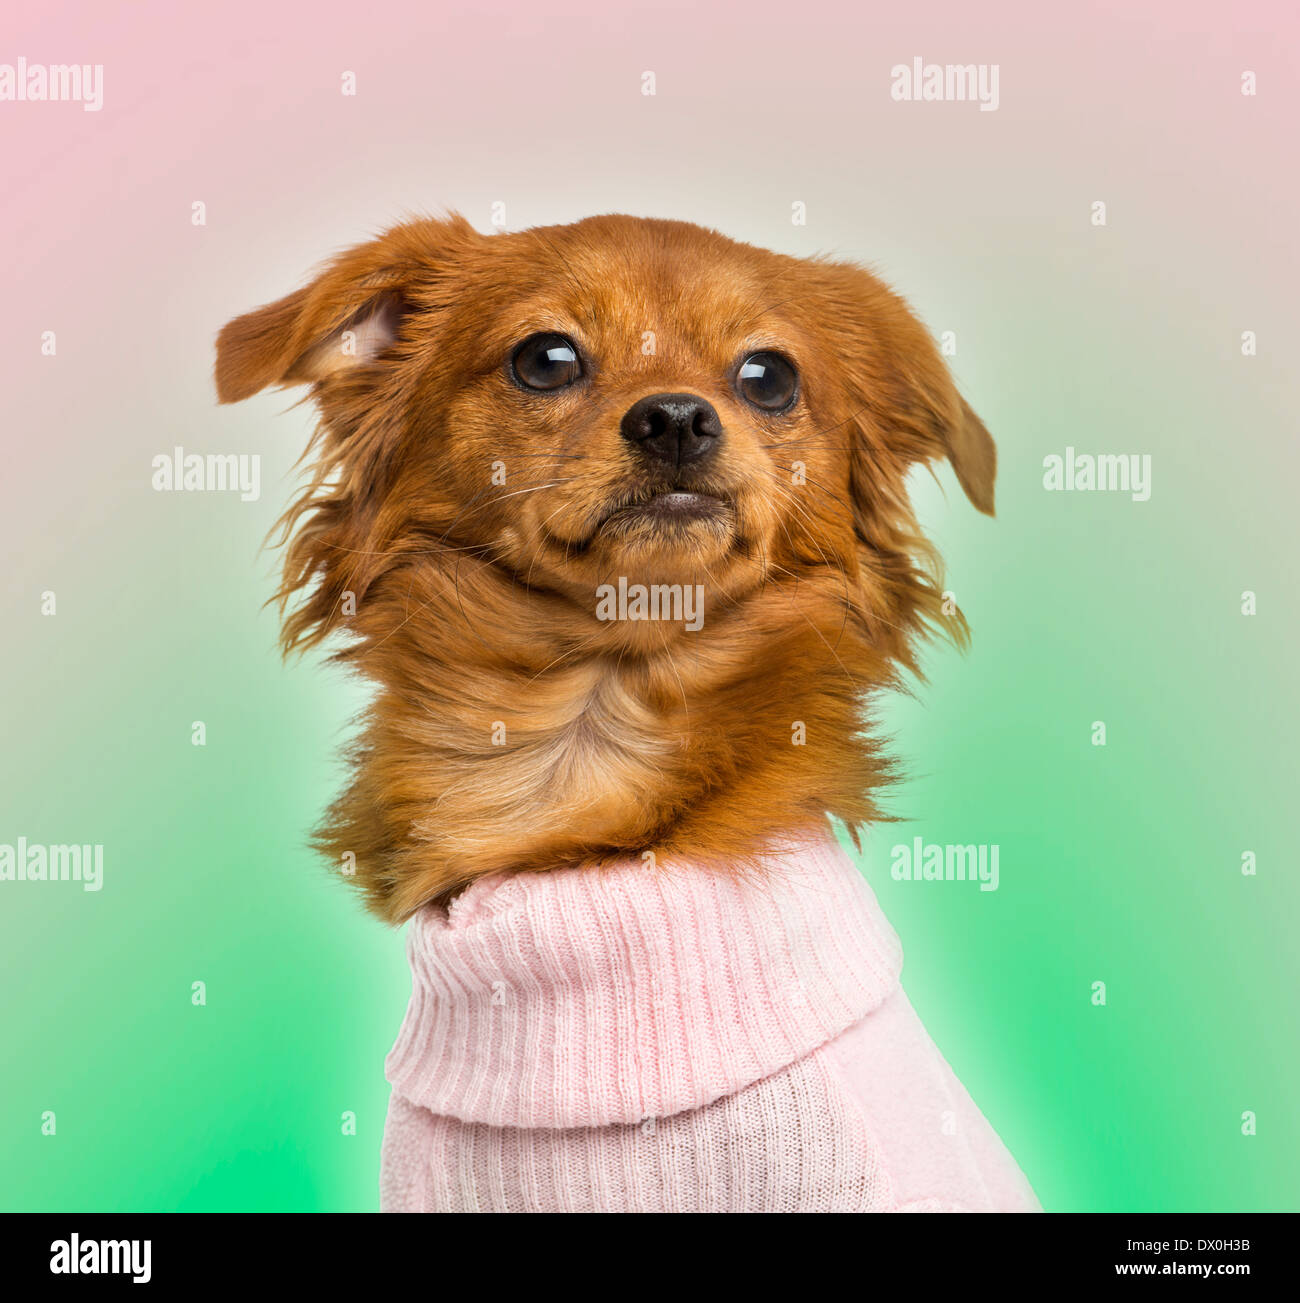 Close-up of a Dressed-up Mixed-breed Chihuahua, 10 months old, on bicolor background Stock Photo